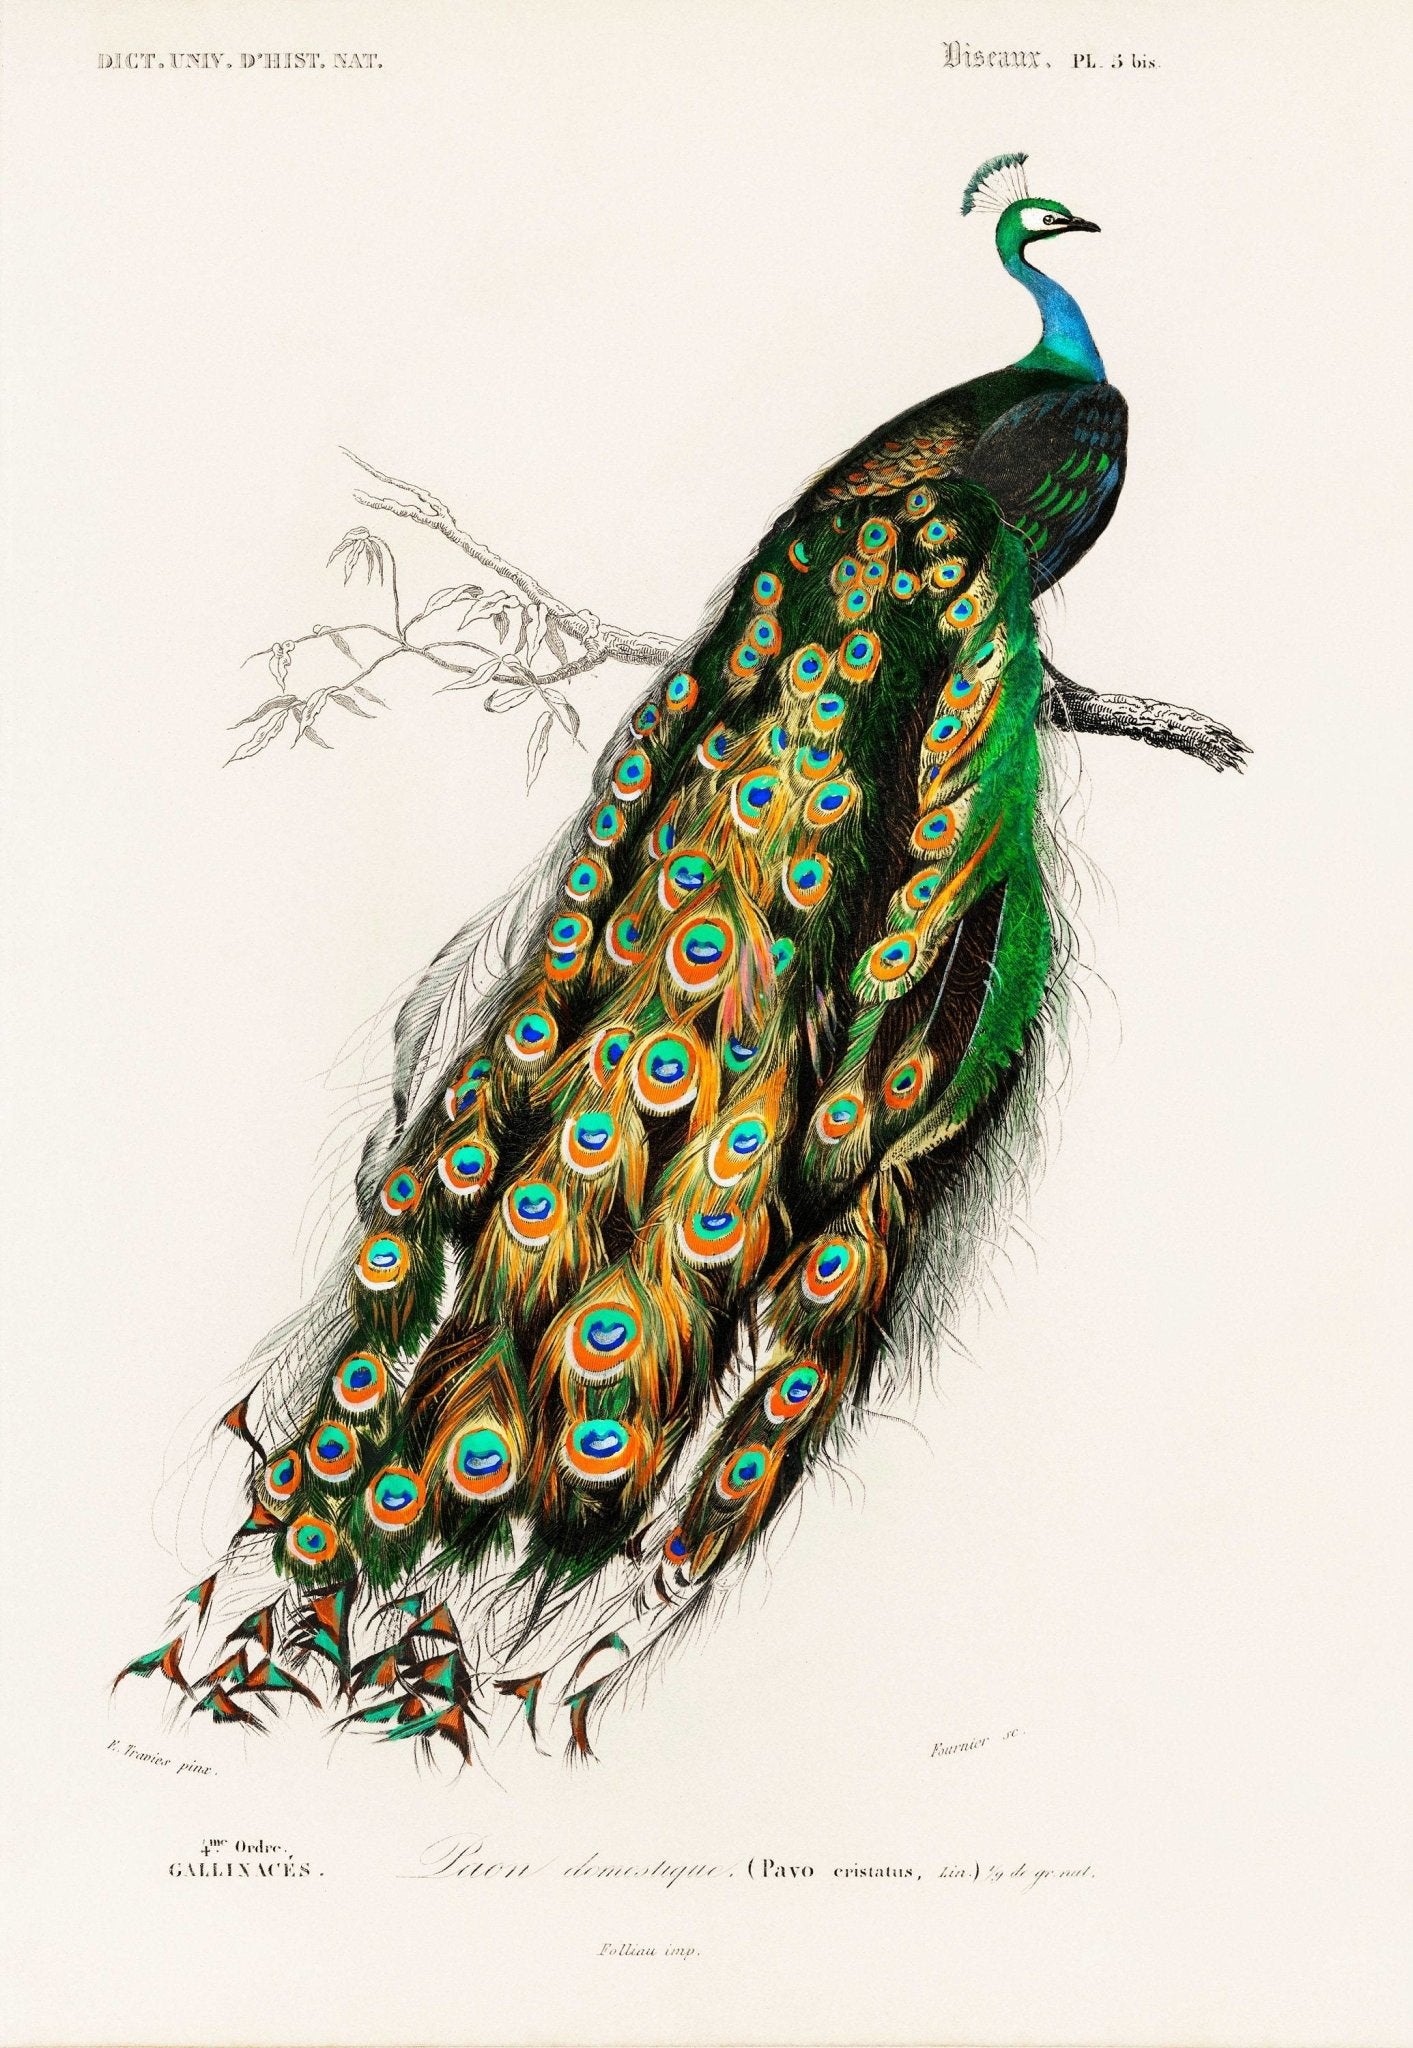 Indian Peacock (Animal Illustration from ‘Dictionnaire Universel D'histoire Naturelle’)